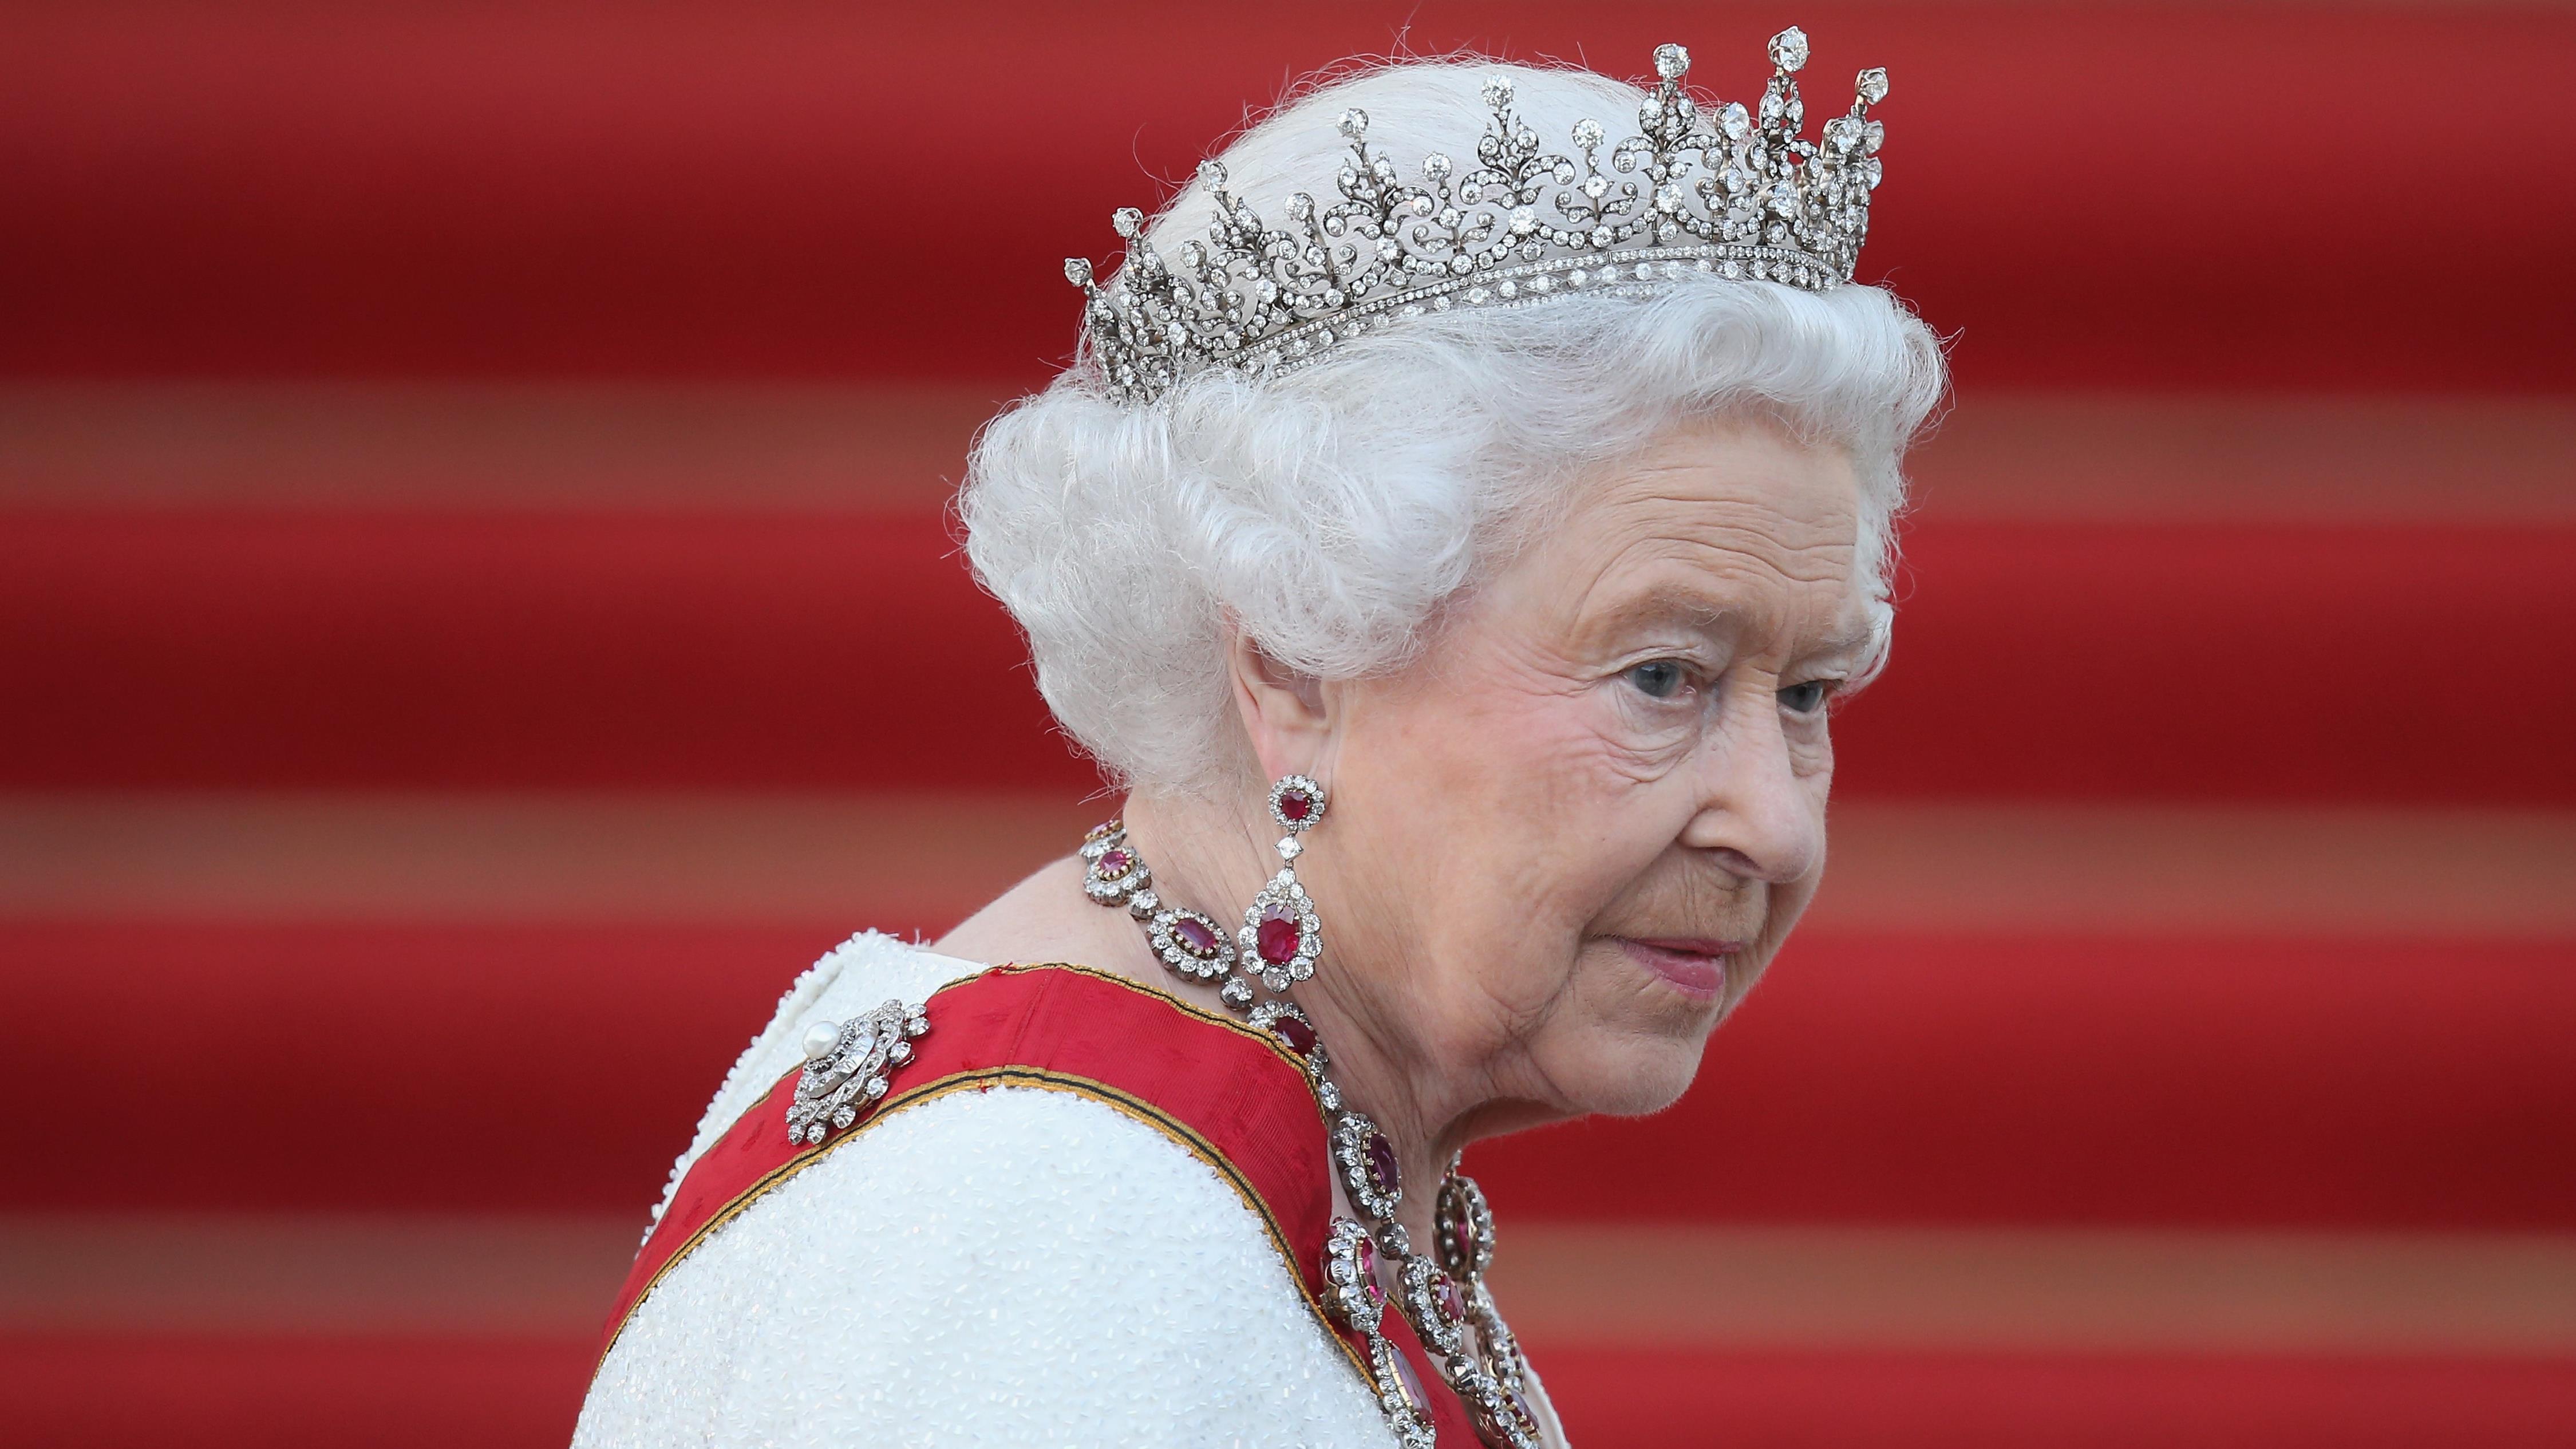 Portrait of the Queen with her crown.